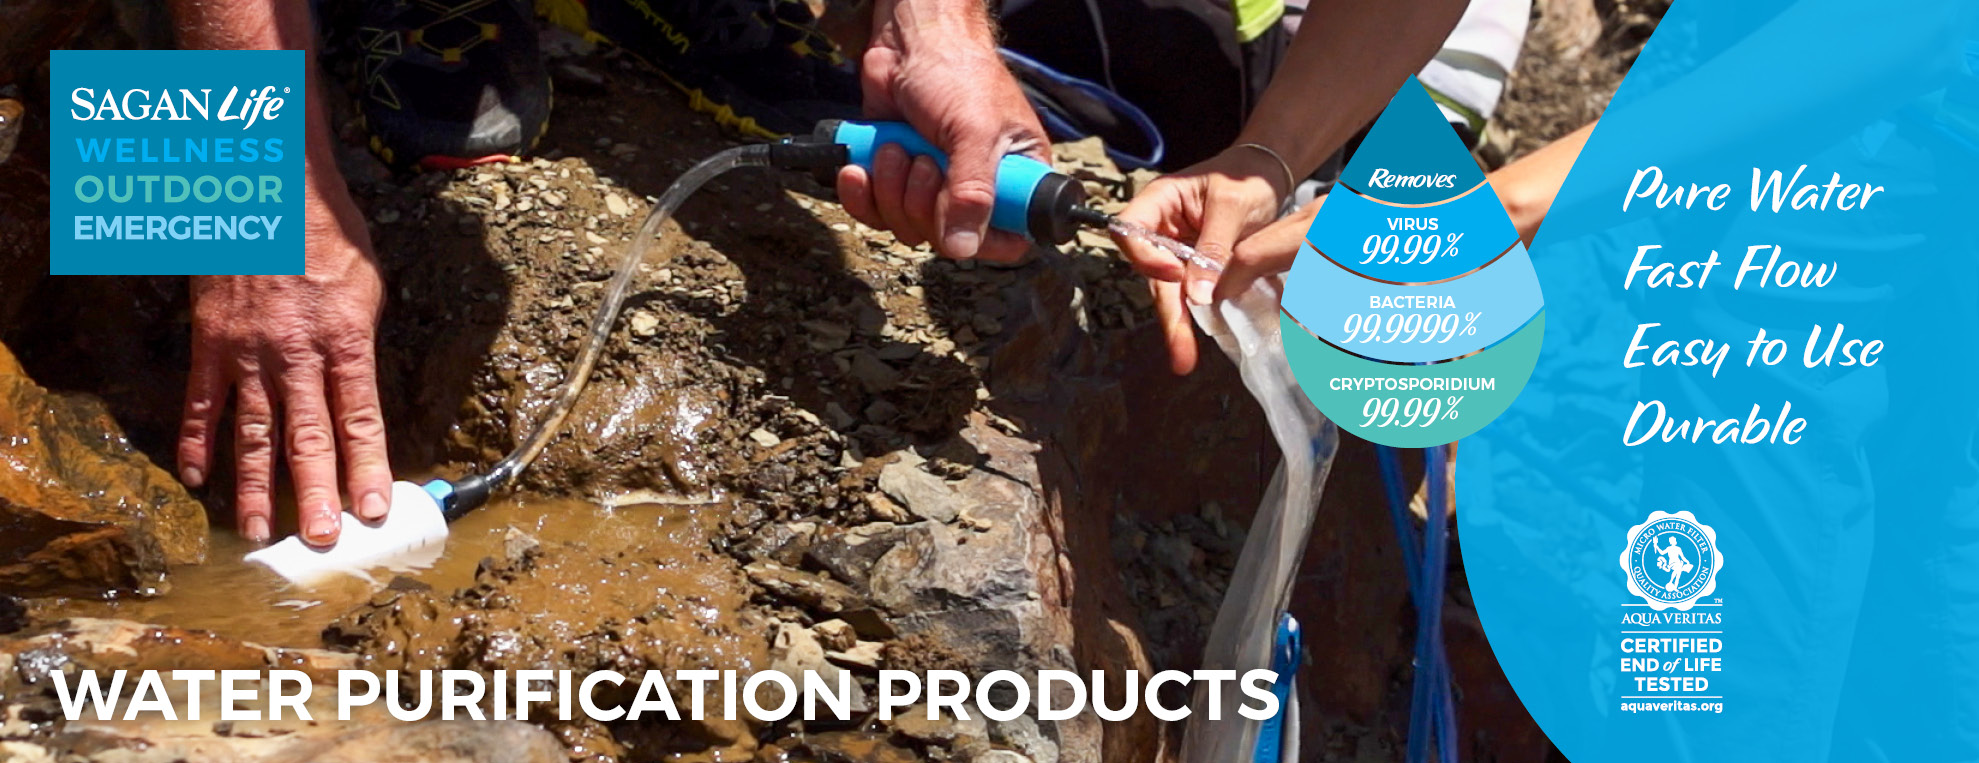 Best portable water filter